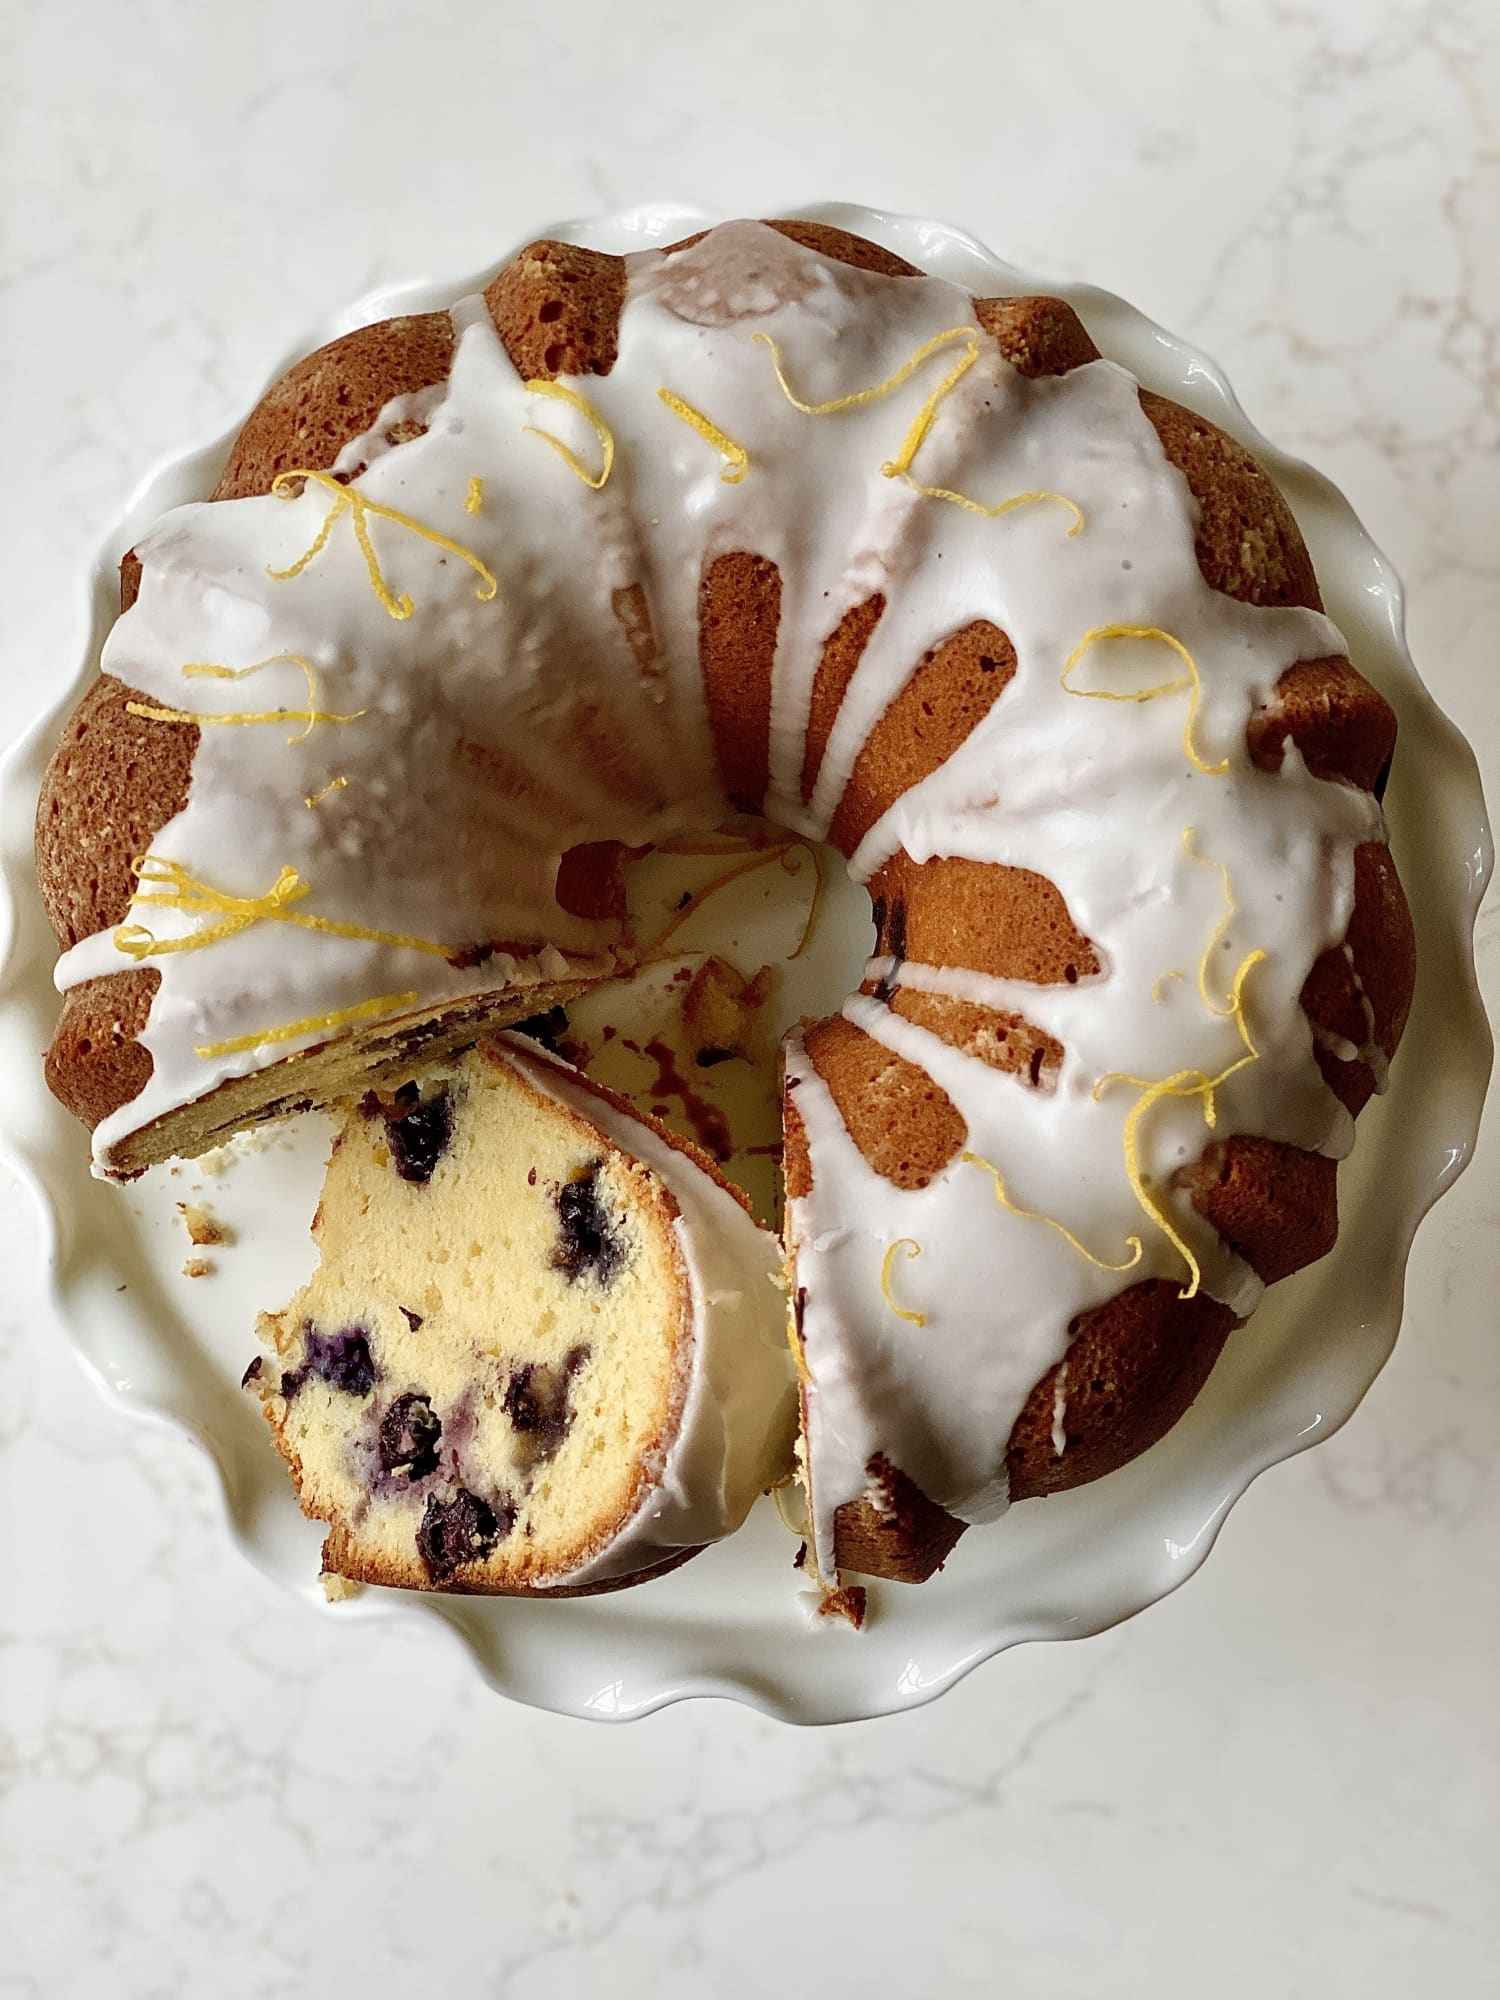 Cream Cheese Lemon Blueberry Pound Cake Is My Favorite Dessert to Bake for Spring